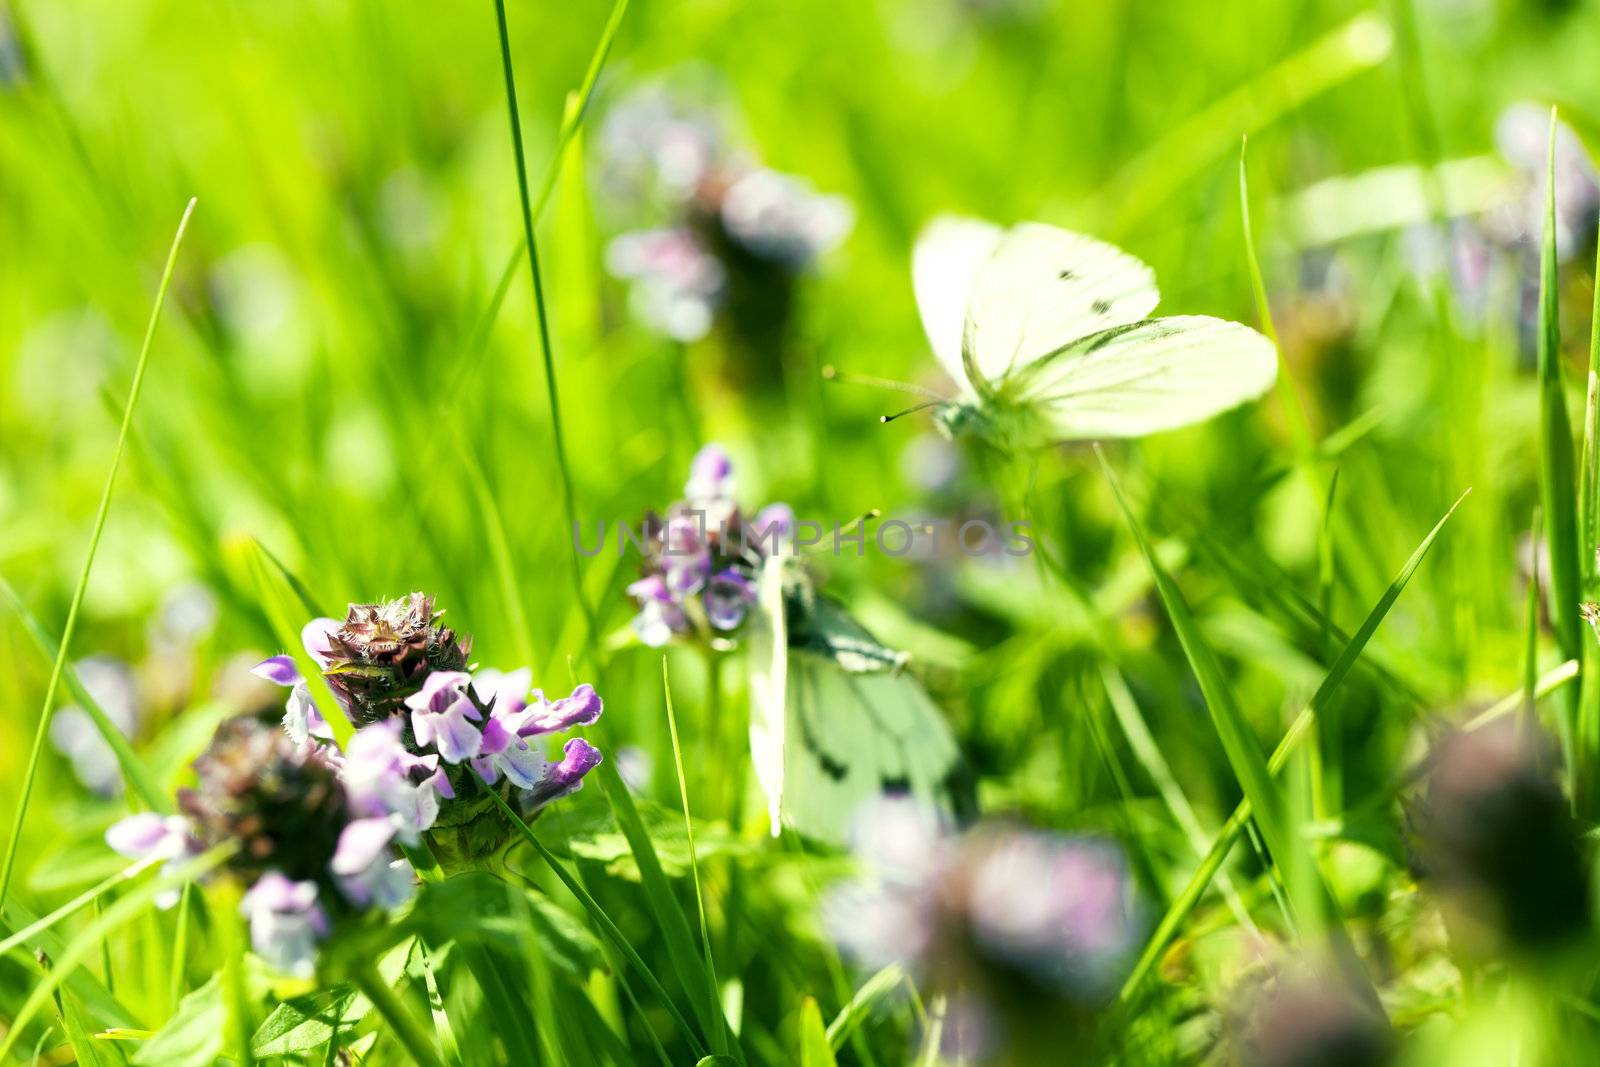 purpe clover blossom in front of blurred mating butterflies 